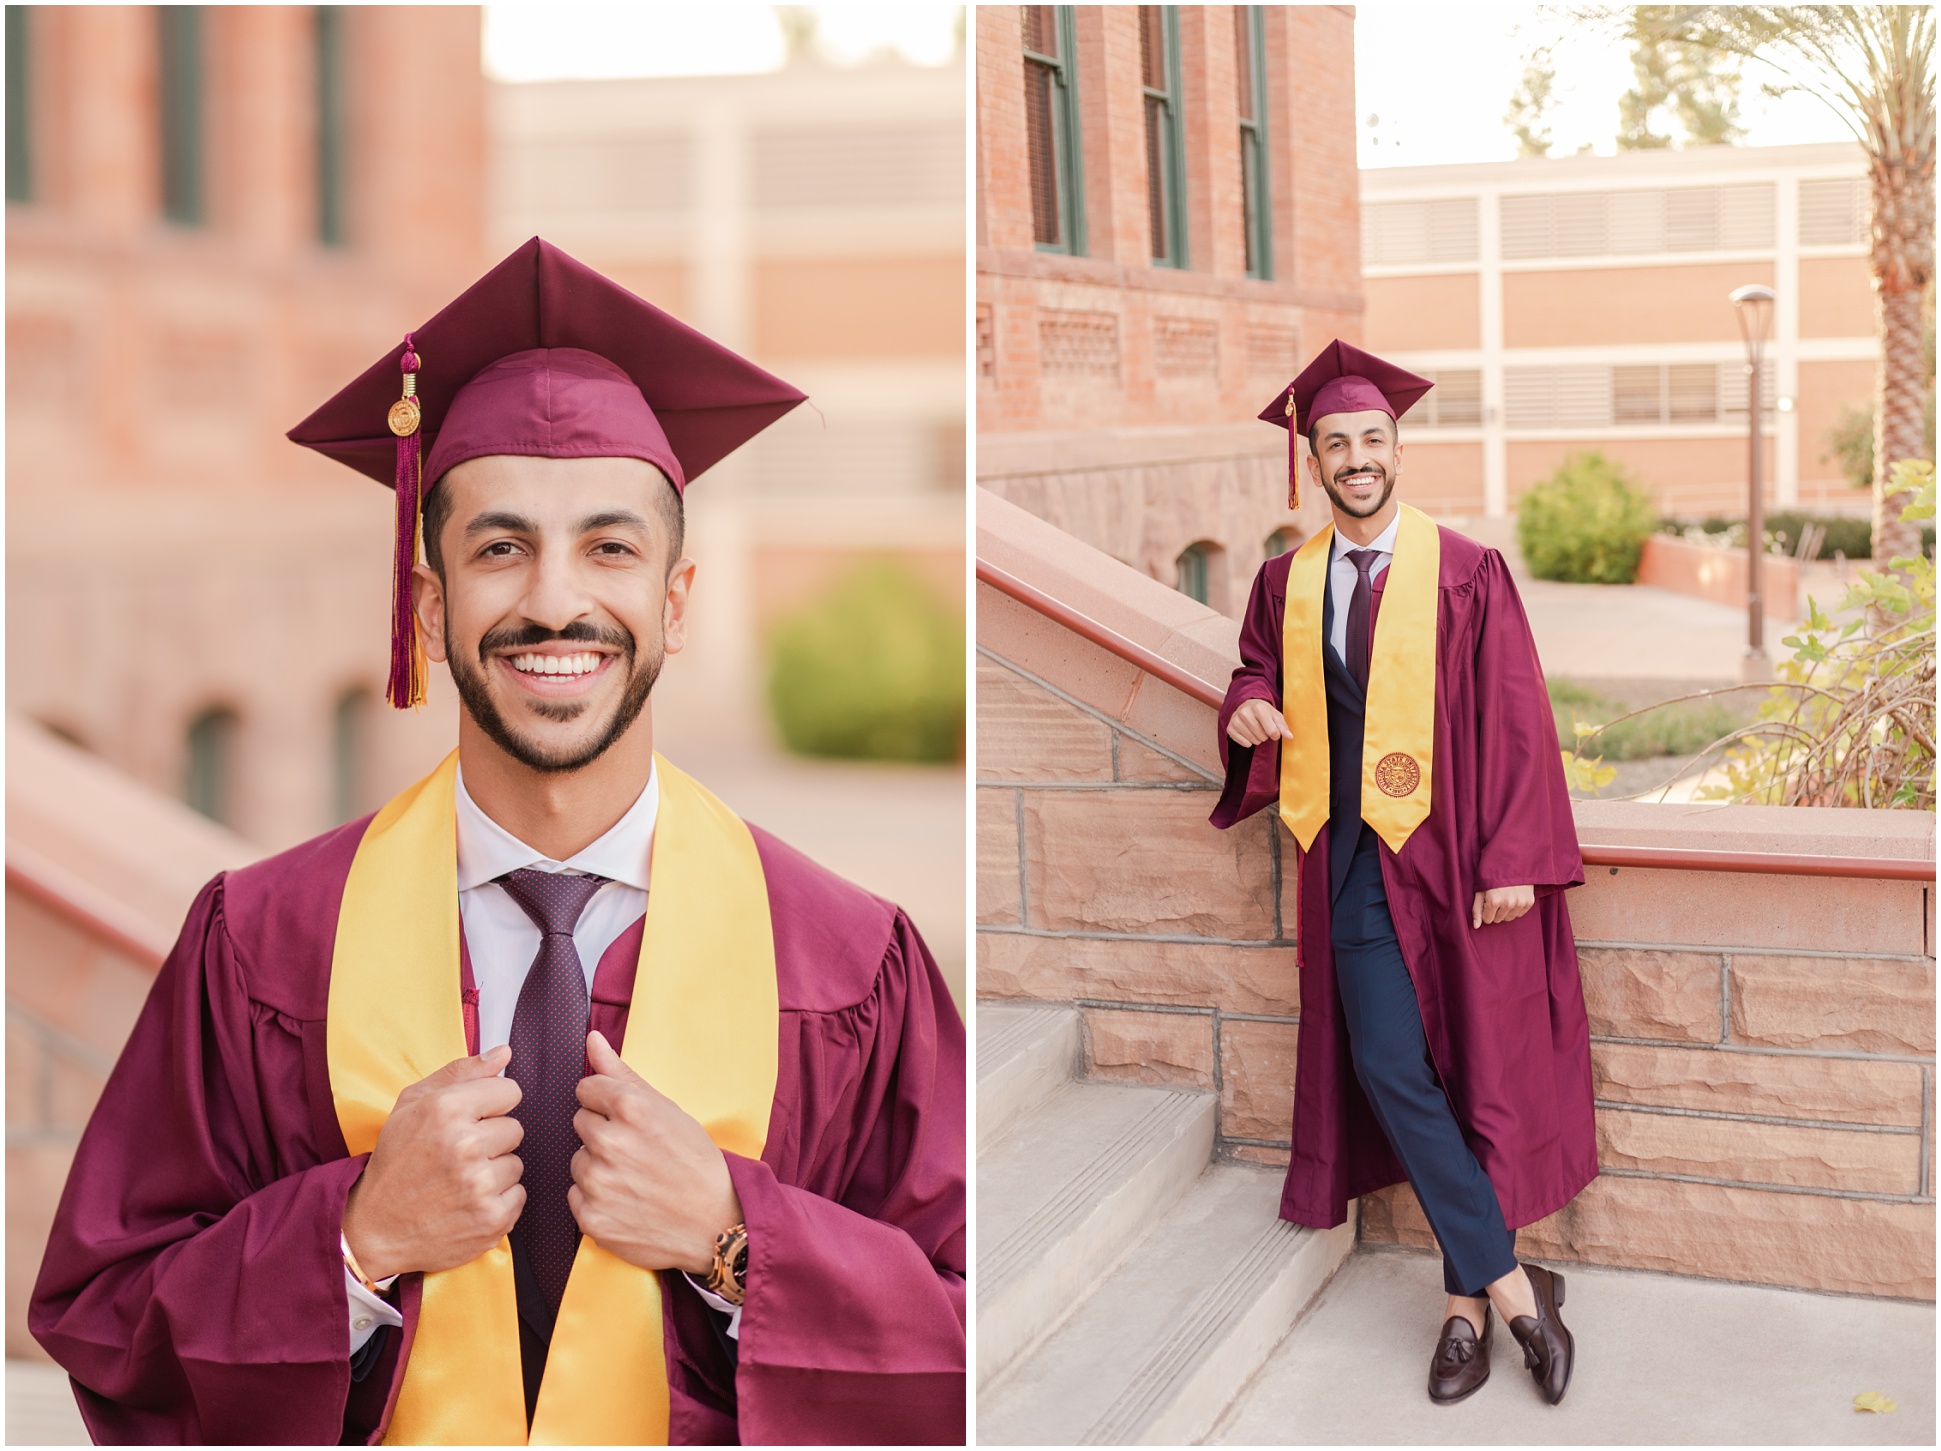 ASU graduate holding academic stole on staircase; ASU student leaning on staircase railing in graduation attire